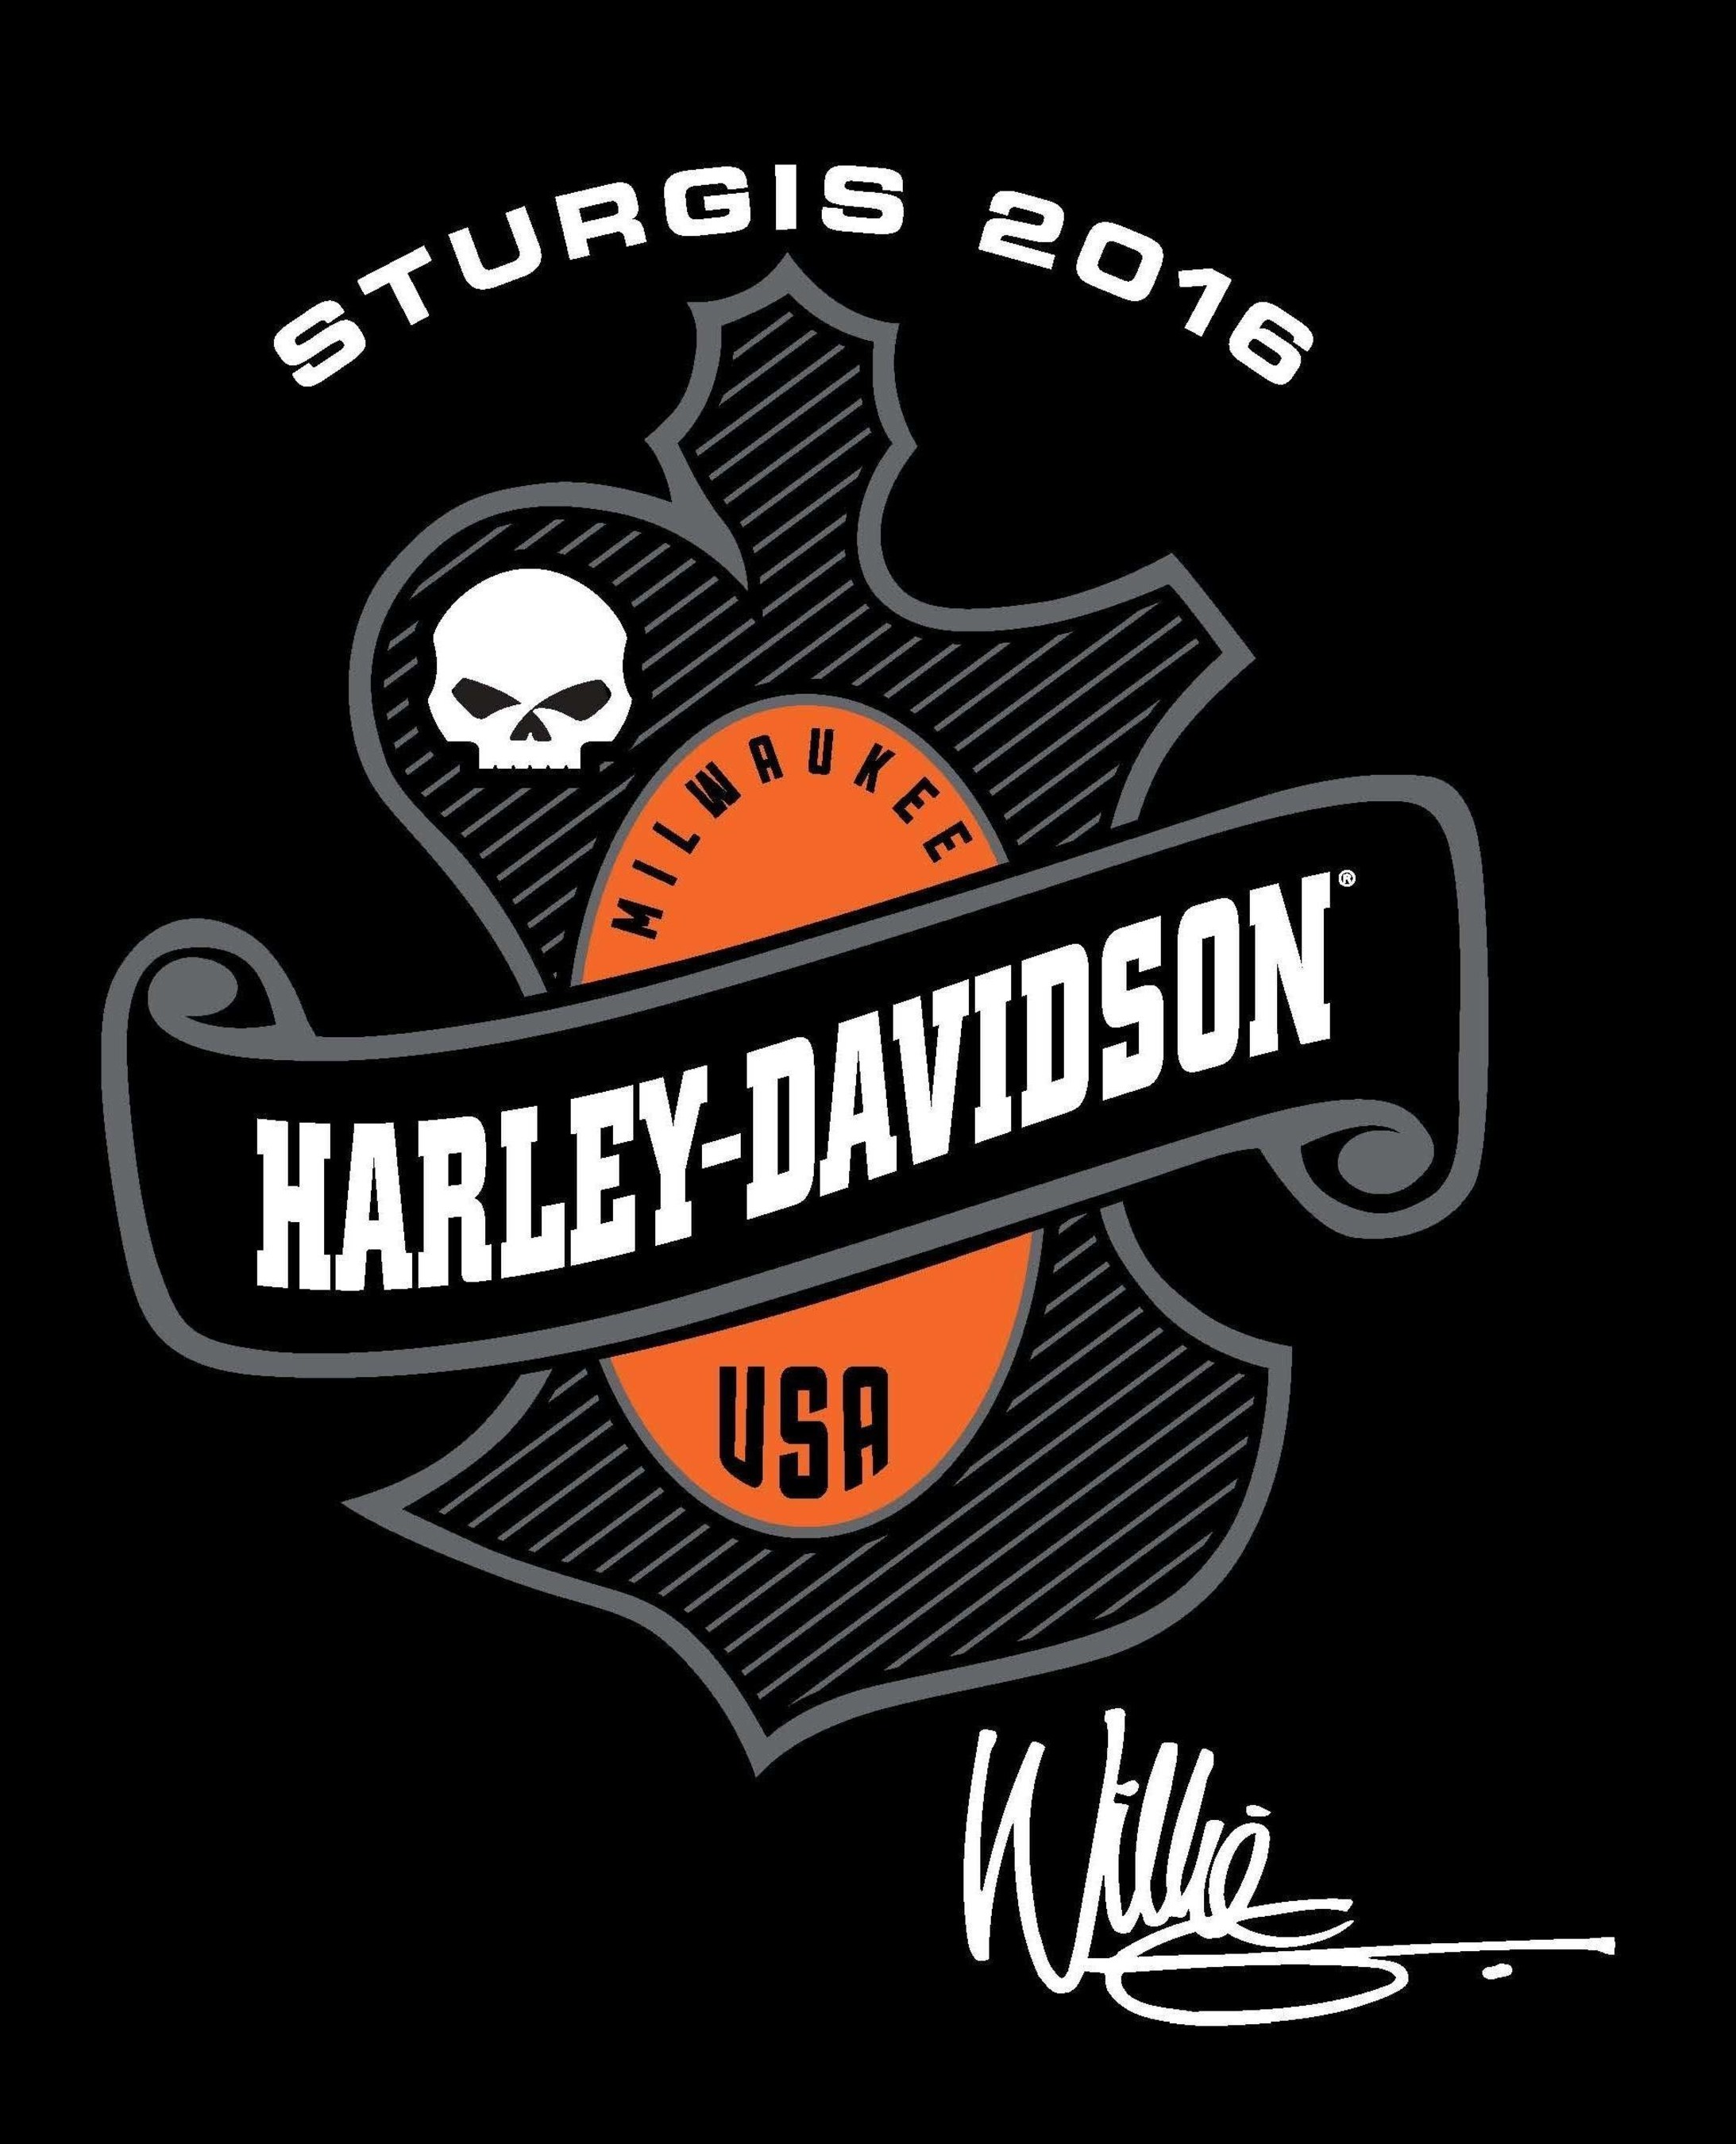 Harley-Davidson will roll into the historic South Dakota Black Hills region with activities planned from Aug. 6-13. Just a few of the activities making this Sturgis Motorcycle Rally one of the best yet are daily concerts, parties, free demo rides on new 2016 Harley-Davidson motorcycles(R), H.O.G.(R) member special events, Harley-Davidson sponsored AMA Pro Flat Track Racing, the do-not-miss Wall of Death and a new custom motorcycle show.